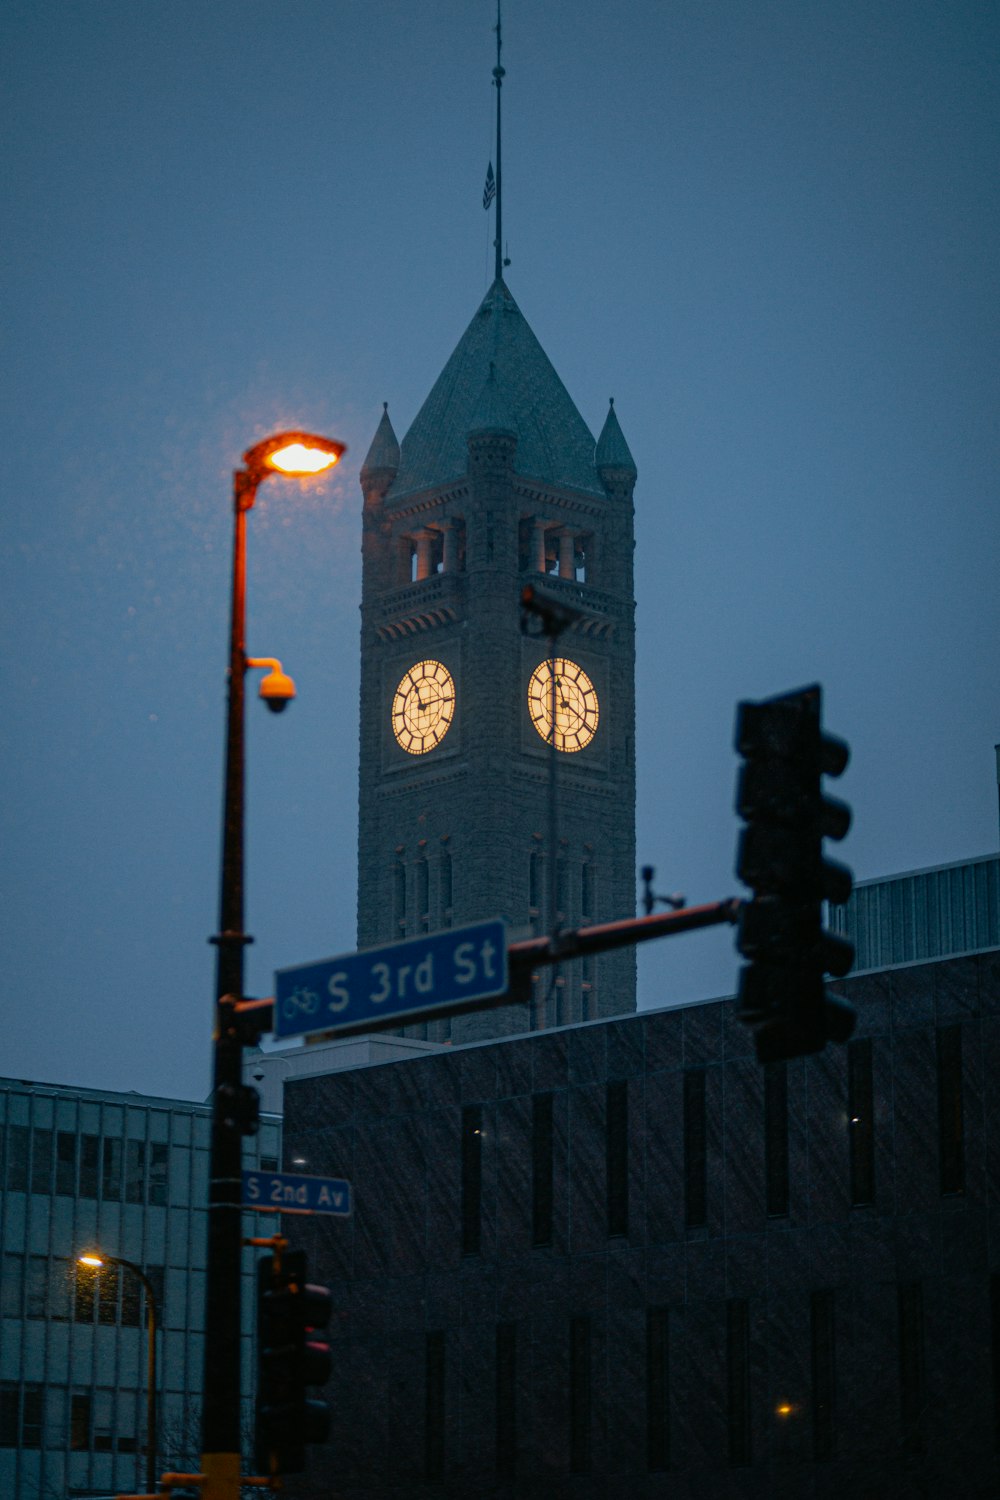 a tall clock tower towering over a city at night